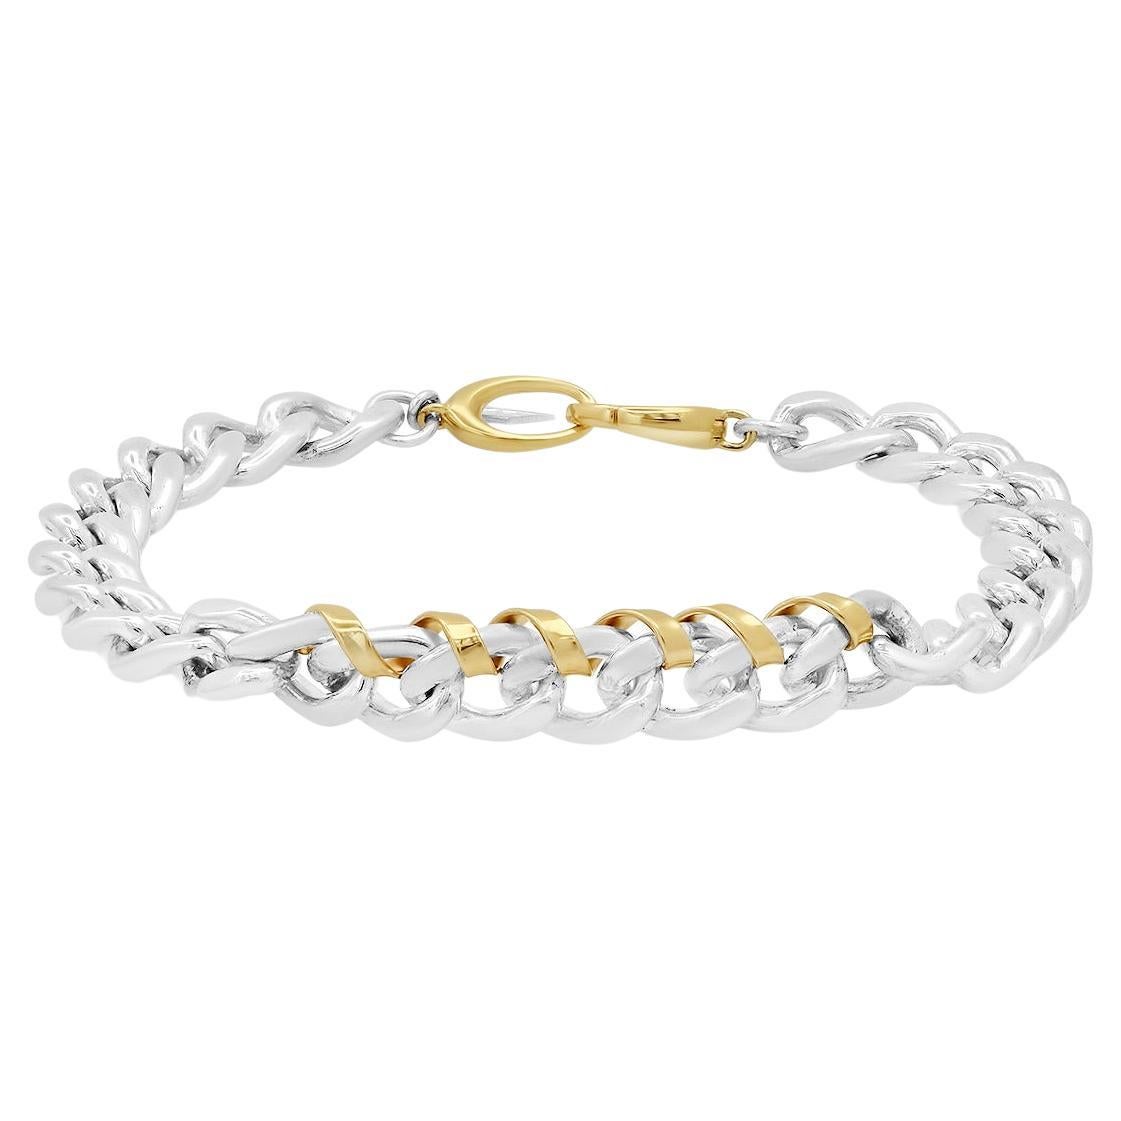 Sterling Silver "Heavy Metal" Wrap-Me-Up Chain Bracelet w/ 14K Gold: Size P/S For Sale